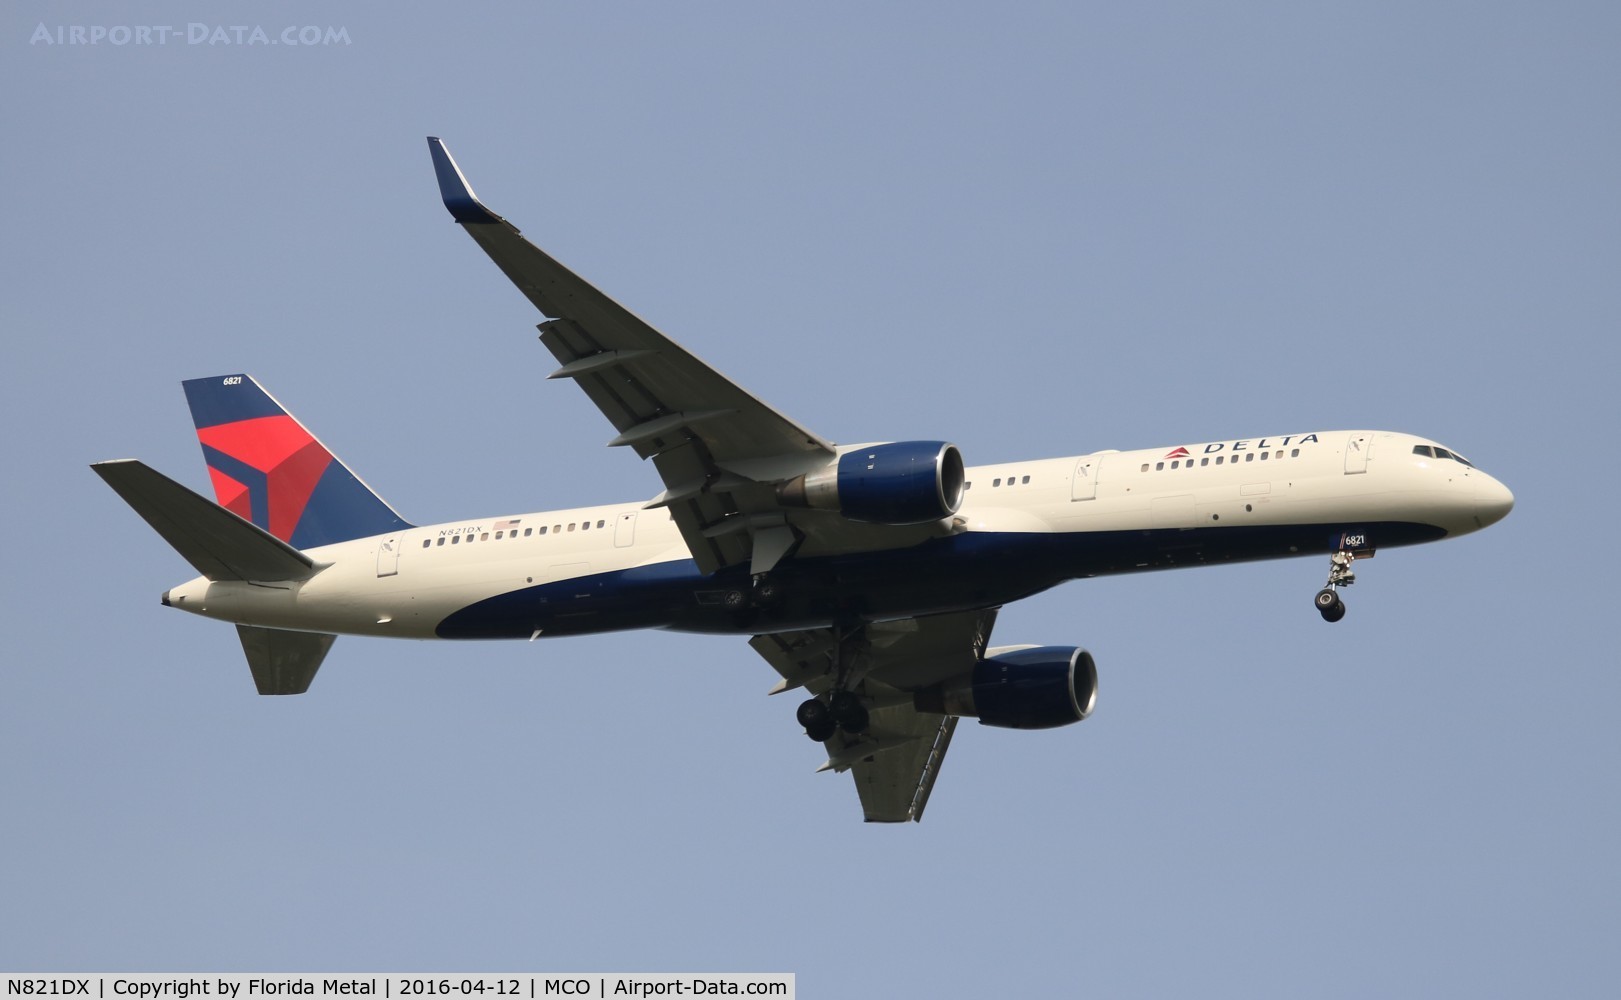 N821DX, 2004 Boeing 757-26D C/N 33961, Delta 757-200 that they picked up from Shanghai Airlines earlier this year ex B-2880